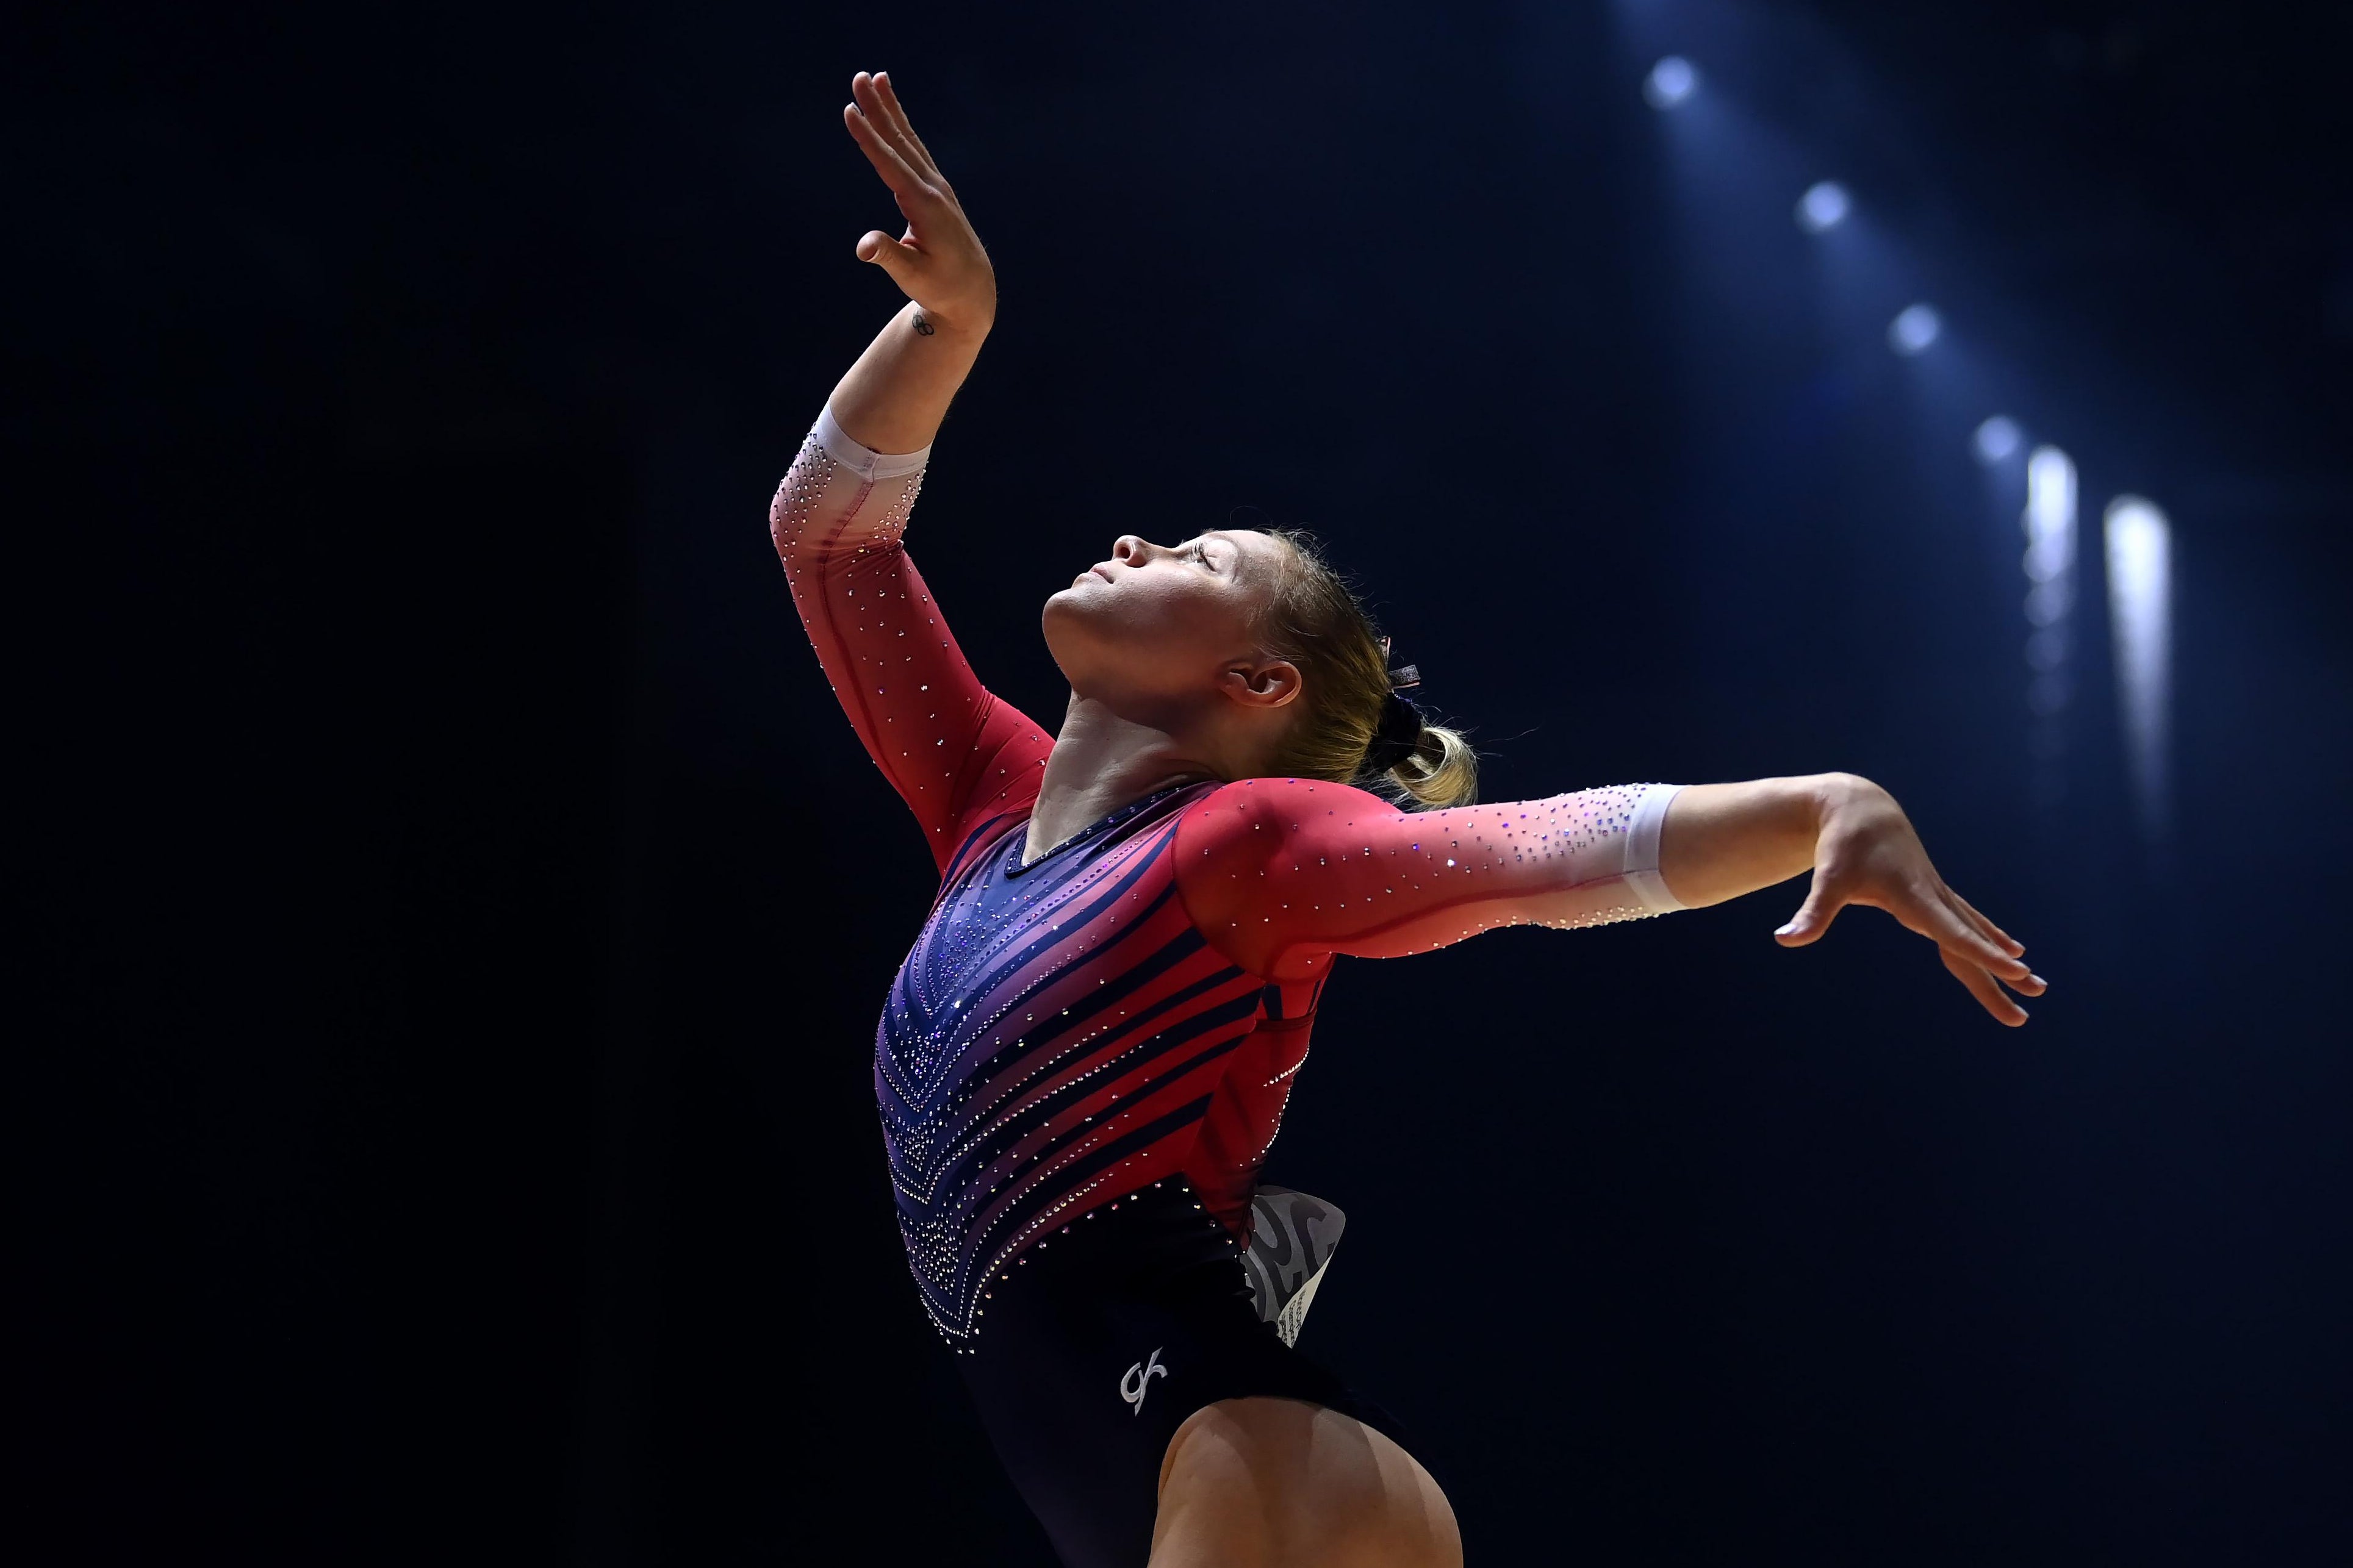 LIVERPOOL, ENGLAND - NOVEMBER 06: Jade Carey of Team United States of America competes during the Women's Floor Final on Day Nine of the FIG Artistic Gymnastics World Championships at M&S Bank Arena on November 06, 2022 in Liverpool, England. (Photo by Laurence Griffiths/Getty Images)